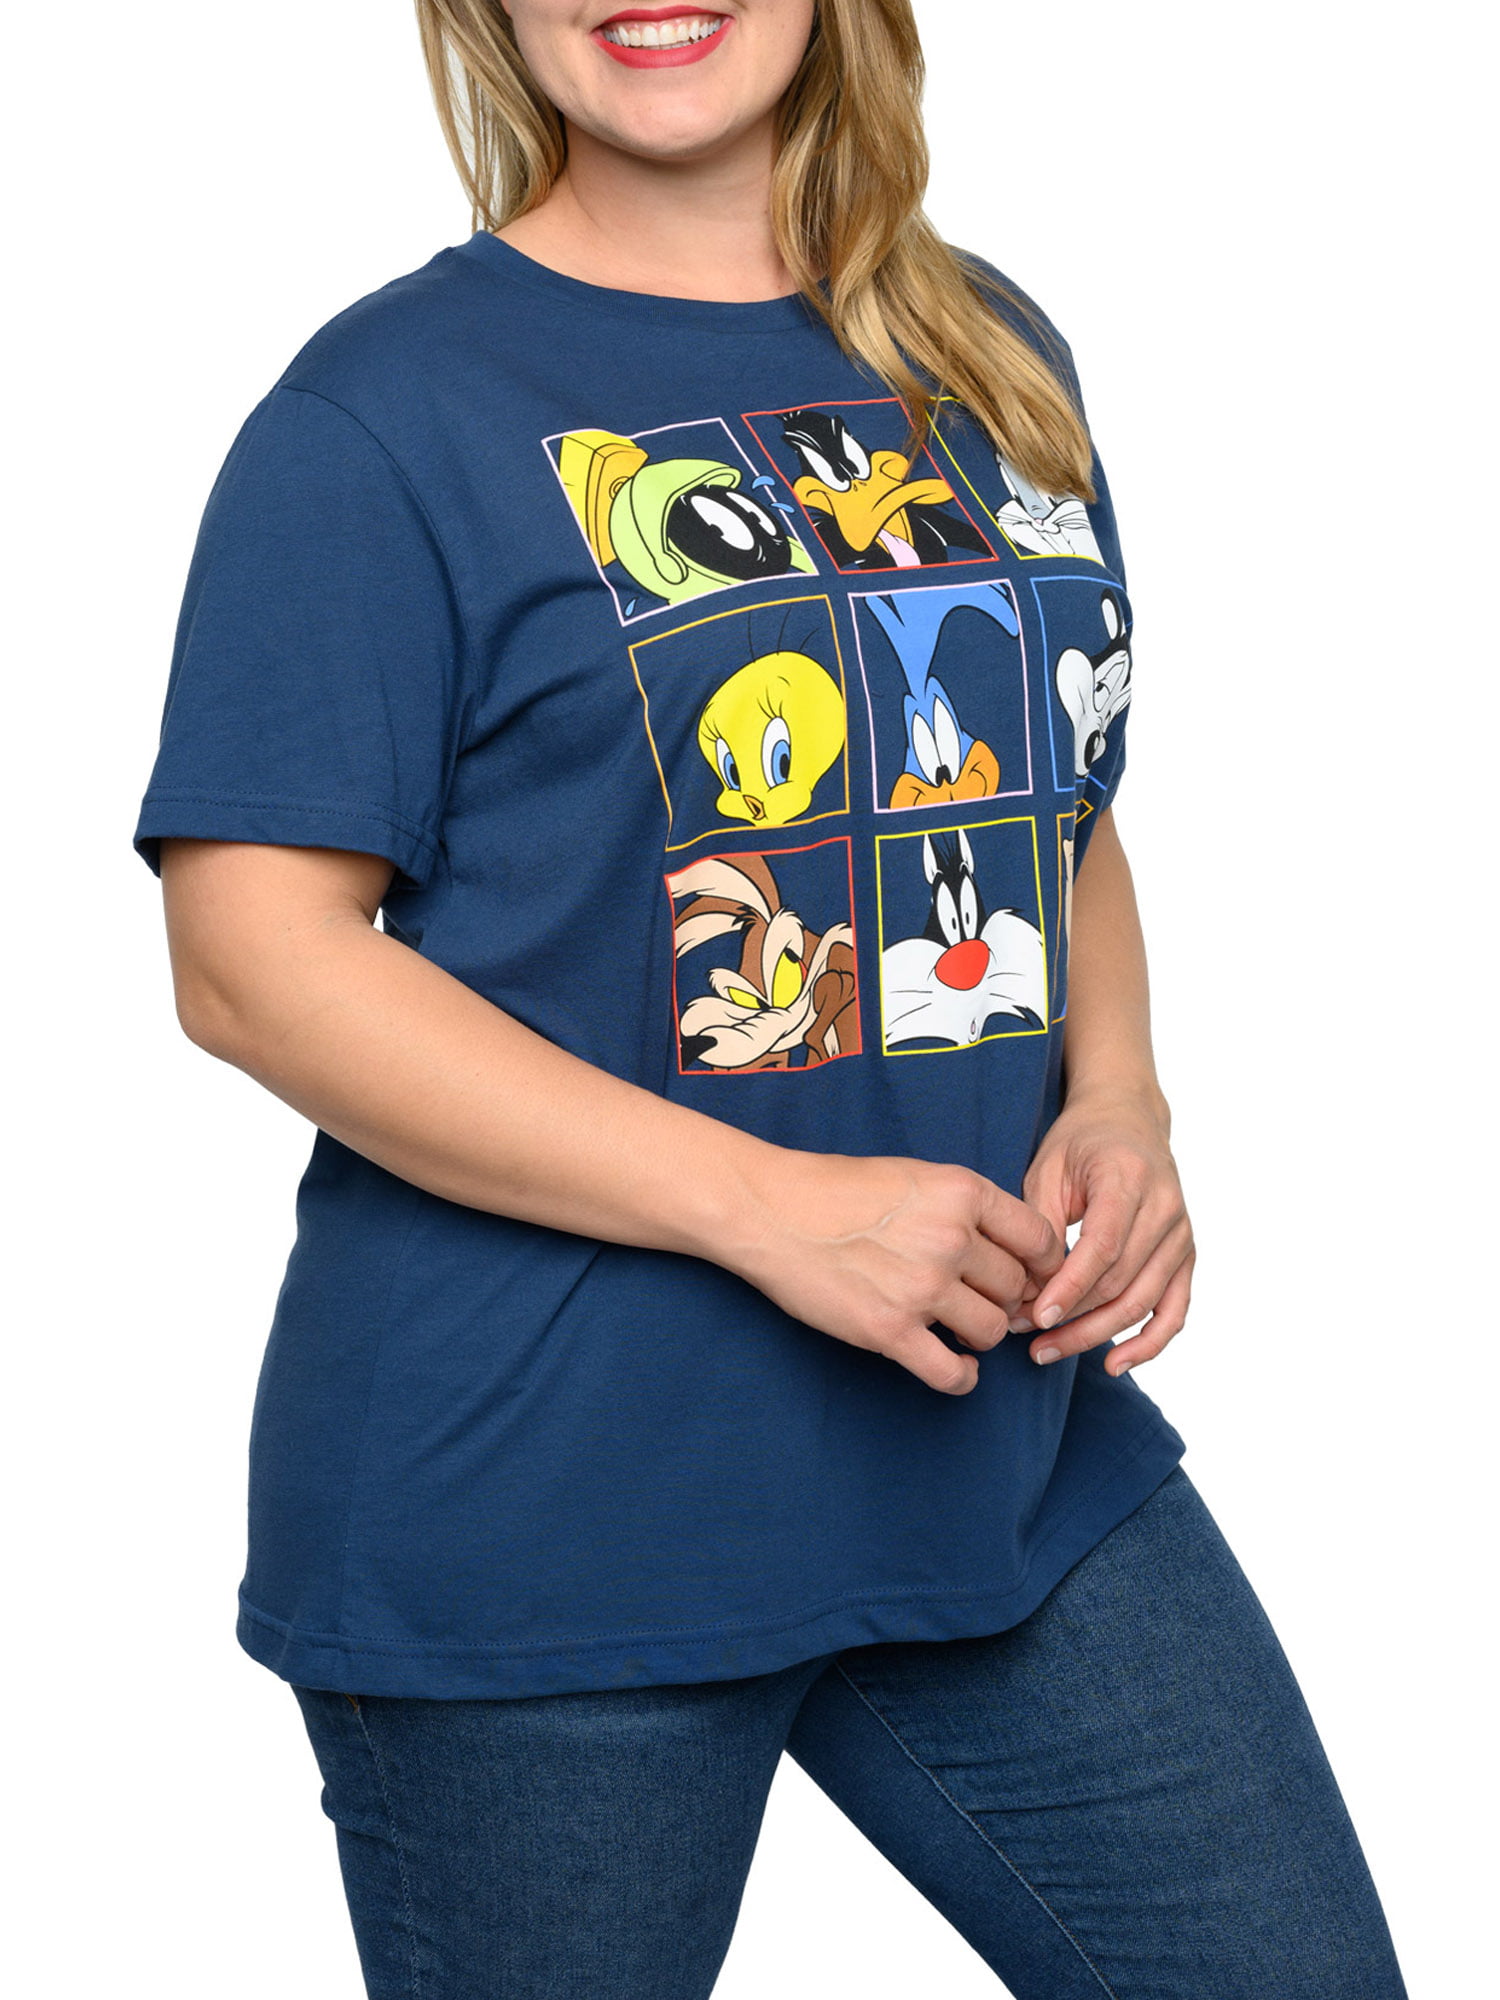 Bugs Tunes Blue Tweety T-Shirt Sylvester Looney Bunny Daffy Size Women\'s Plus